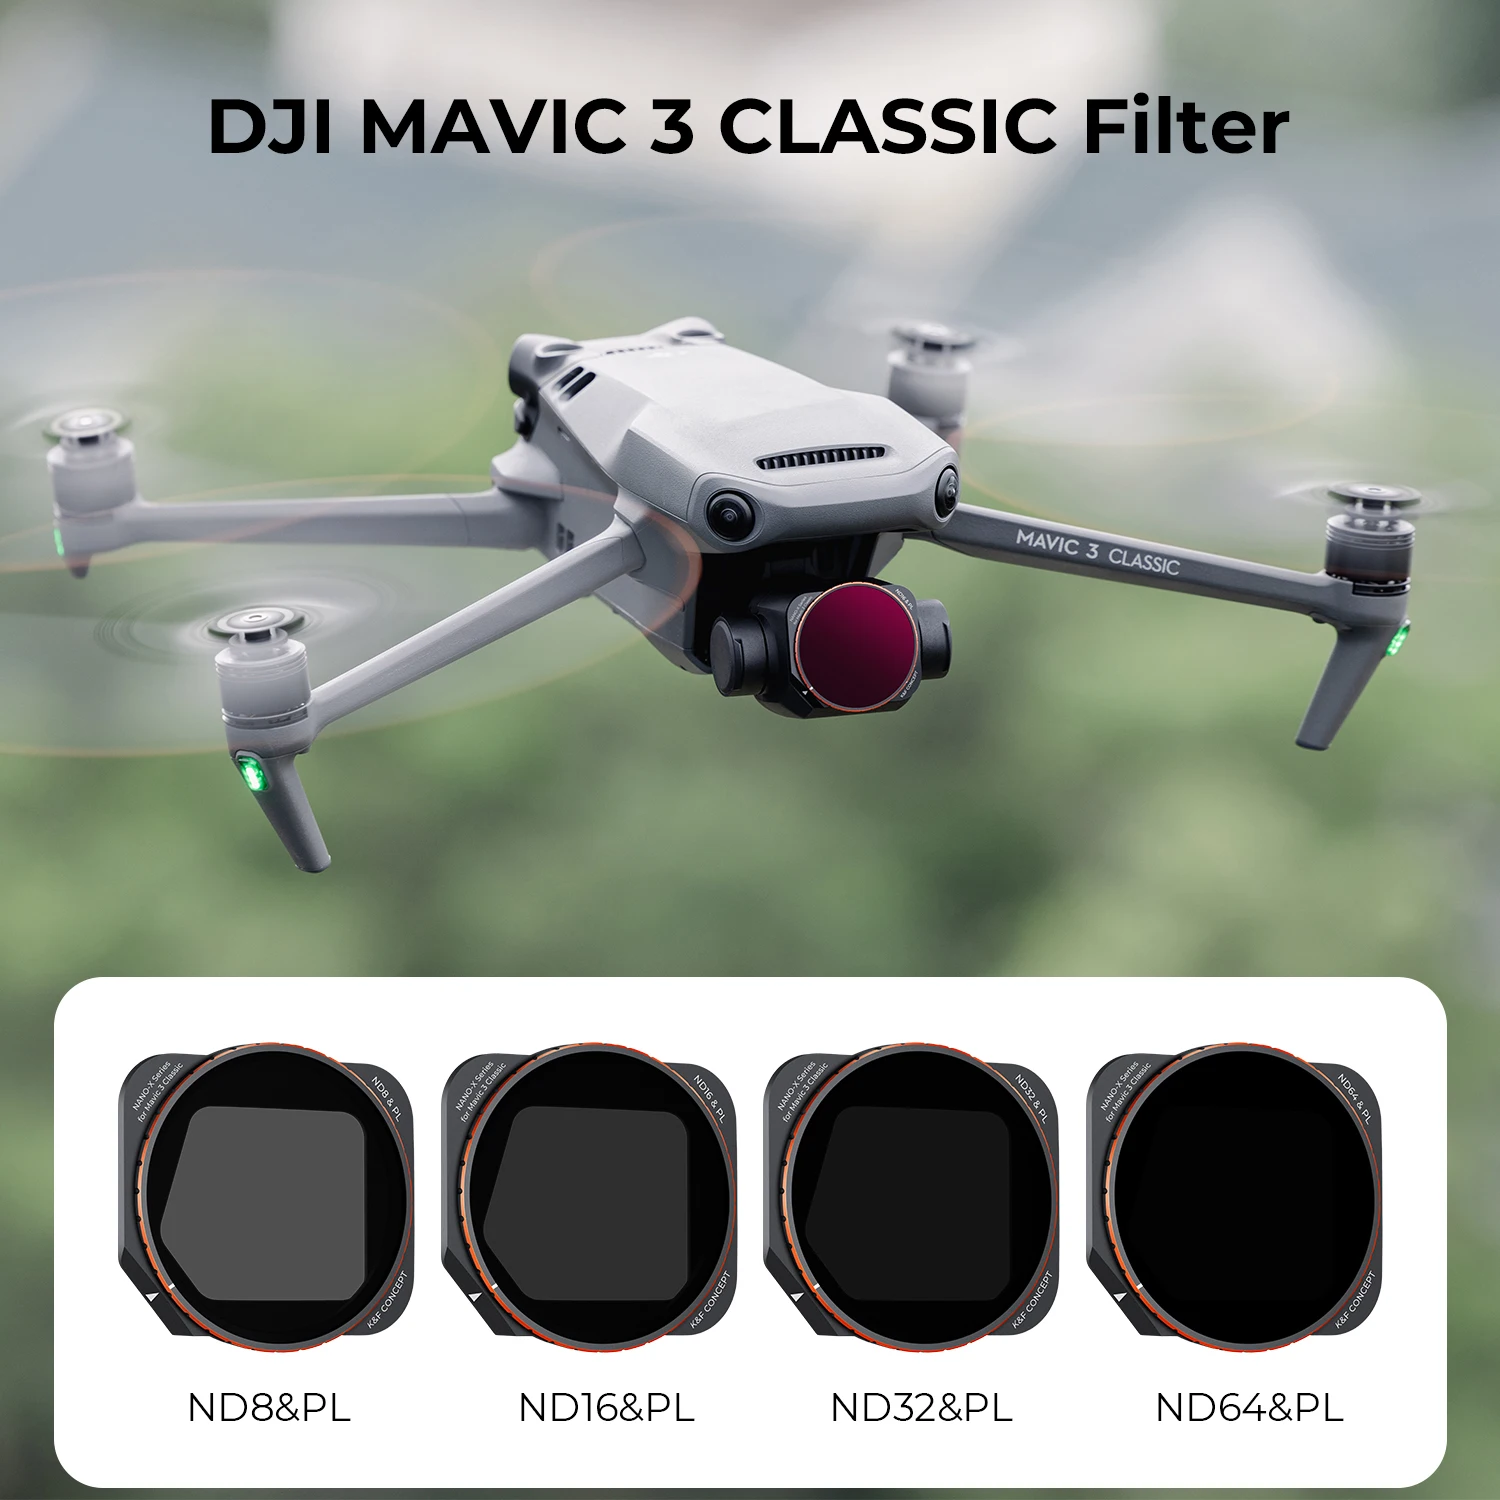 K&F Concept Drone Filters for DJI Mavic 3 Classic Filter 4pcs Set ND/PL8 ND/PL16 ND/PL32 ND/PL64 Camera Filters Kit Accessories enlarge